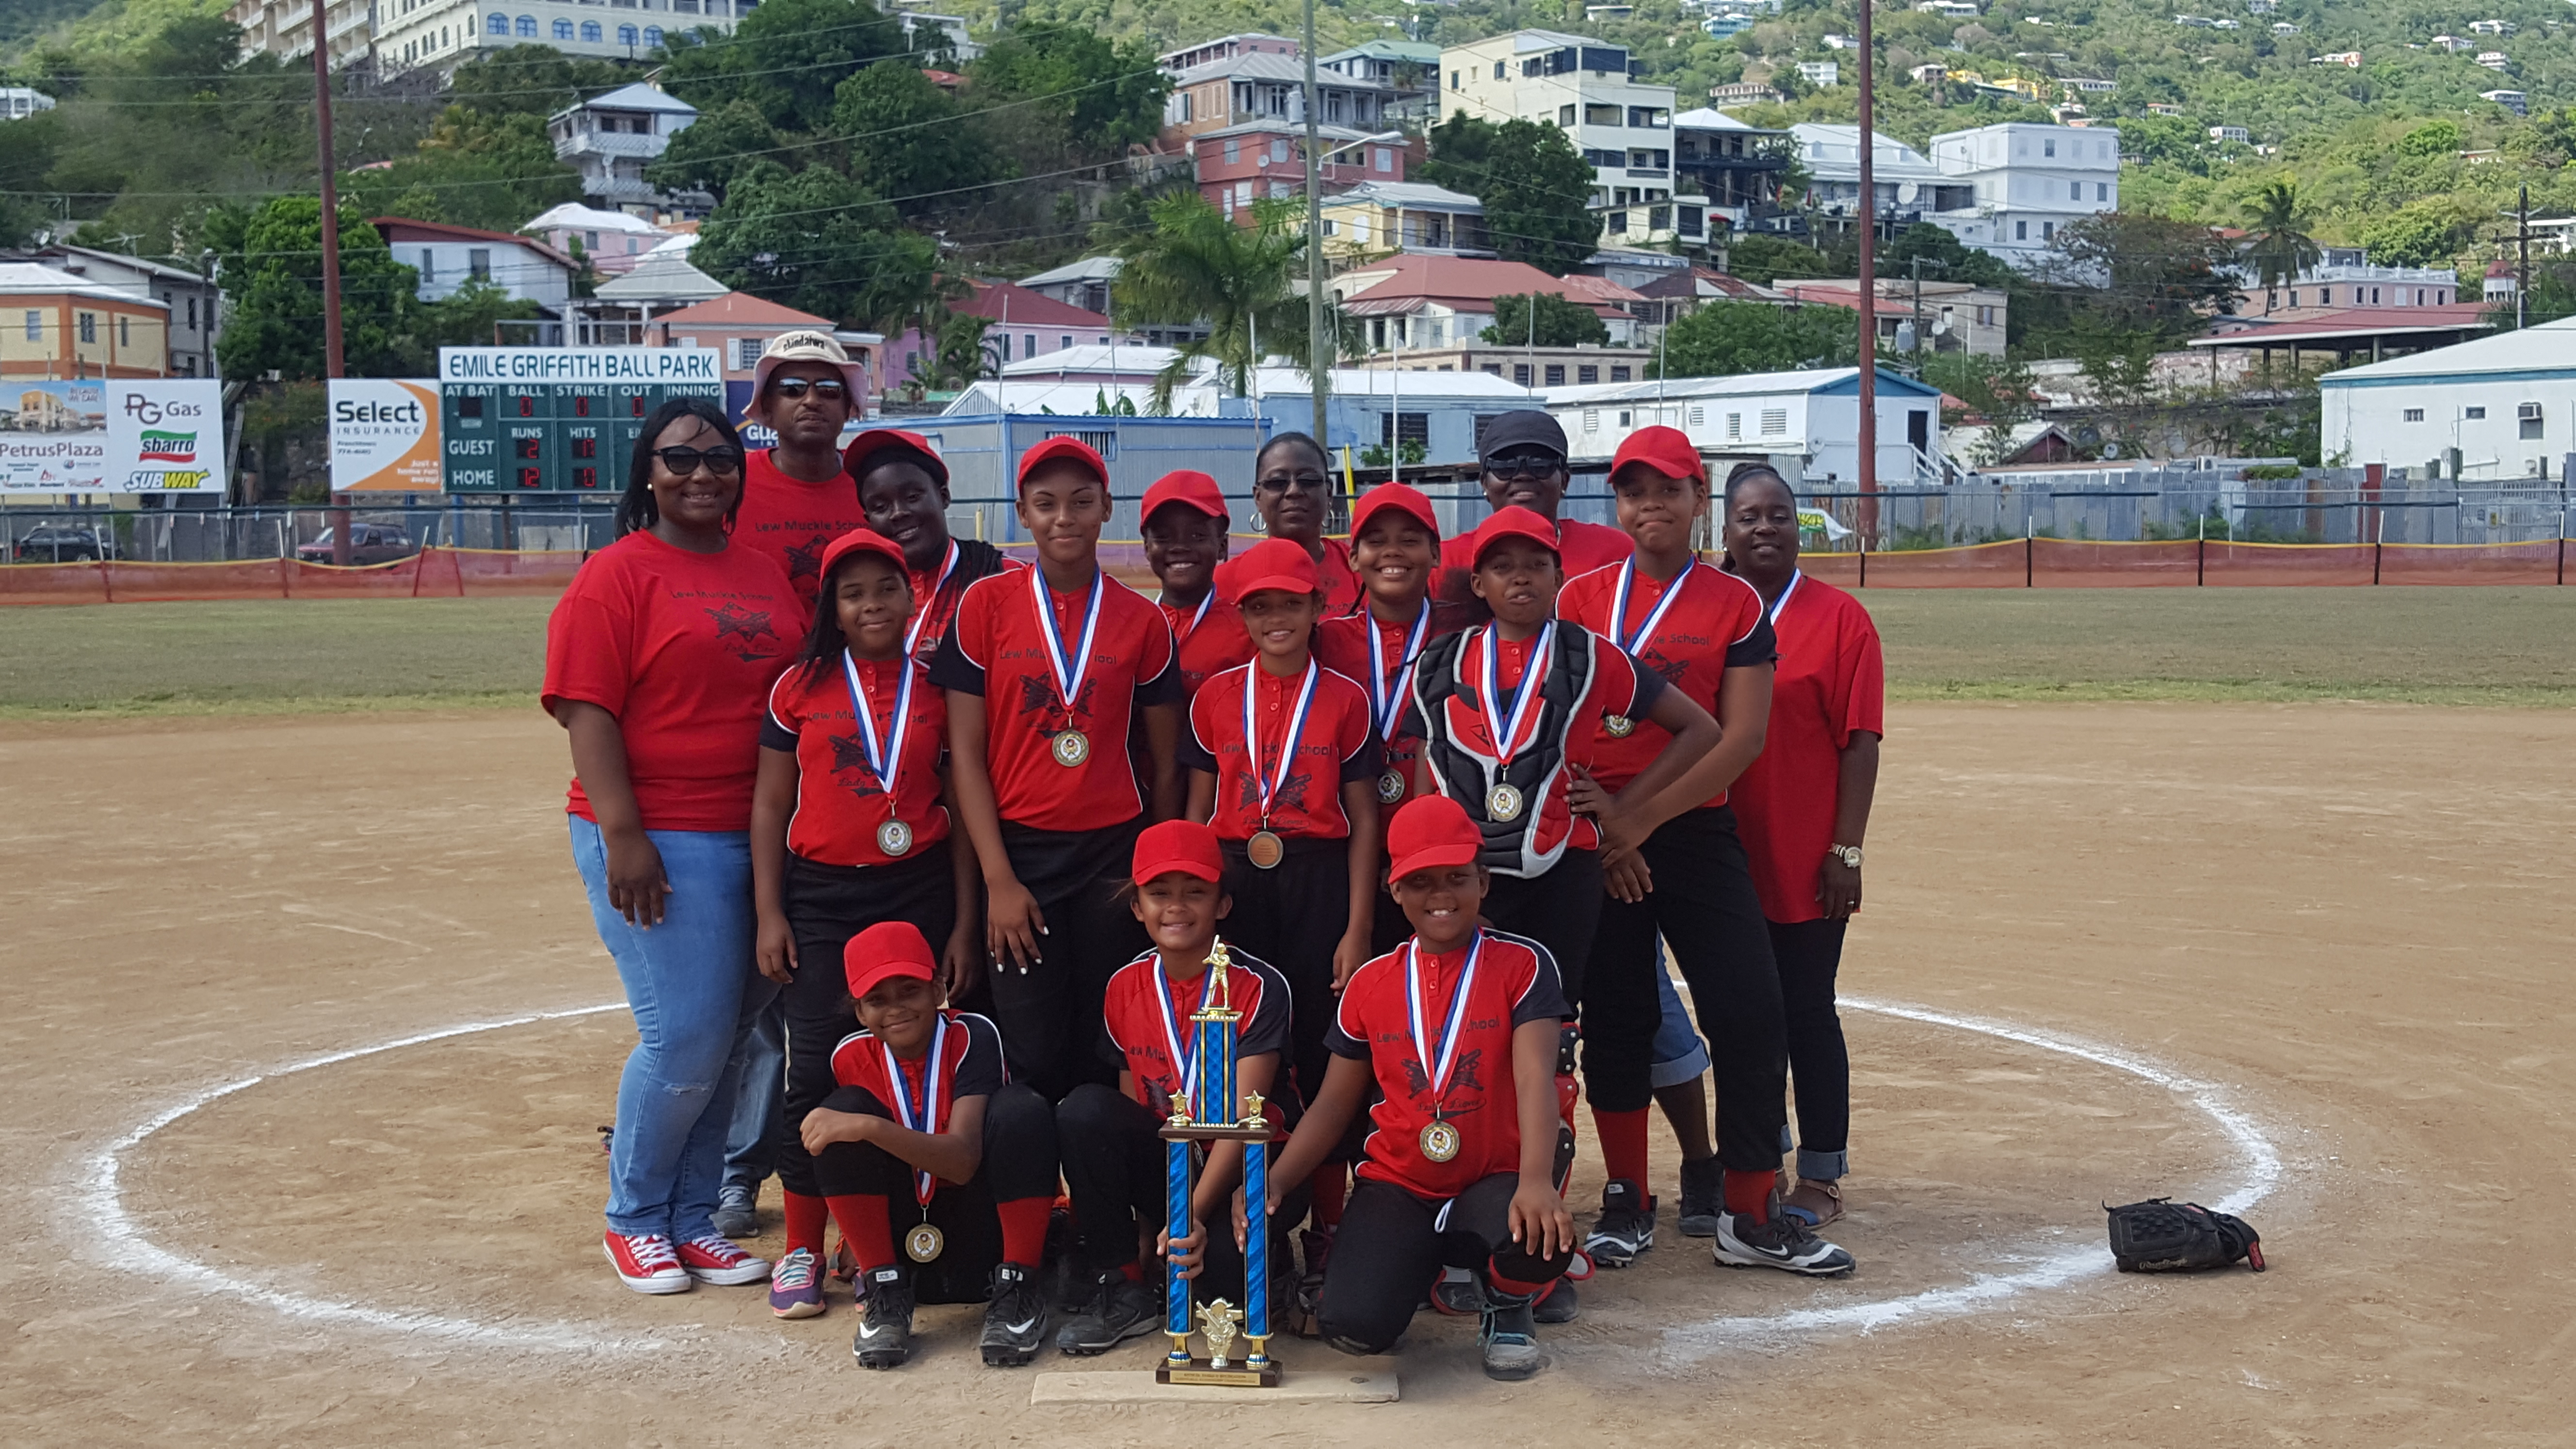 Lew Muckle Elementary Lady Lions Softball Team captured the Sports, Parks and Recreation's Territorial Elementary League title on May 14.